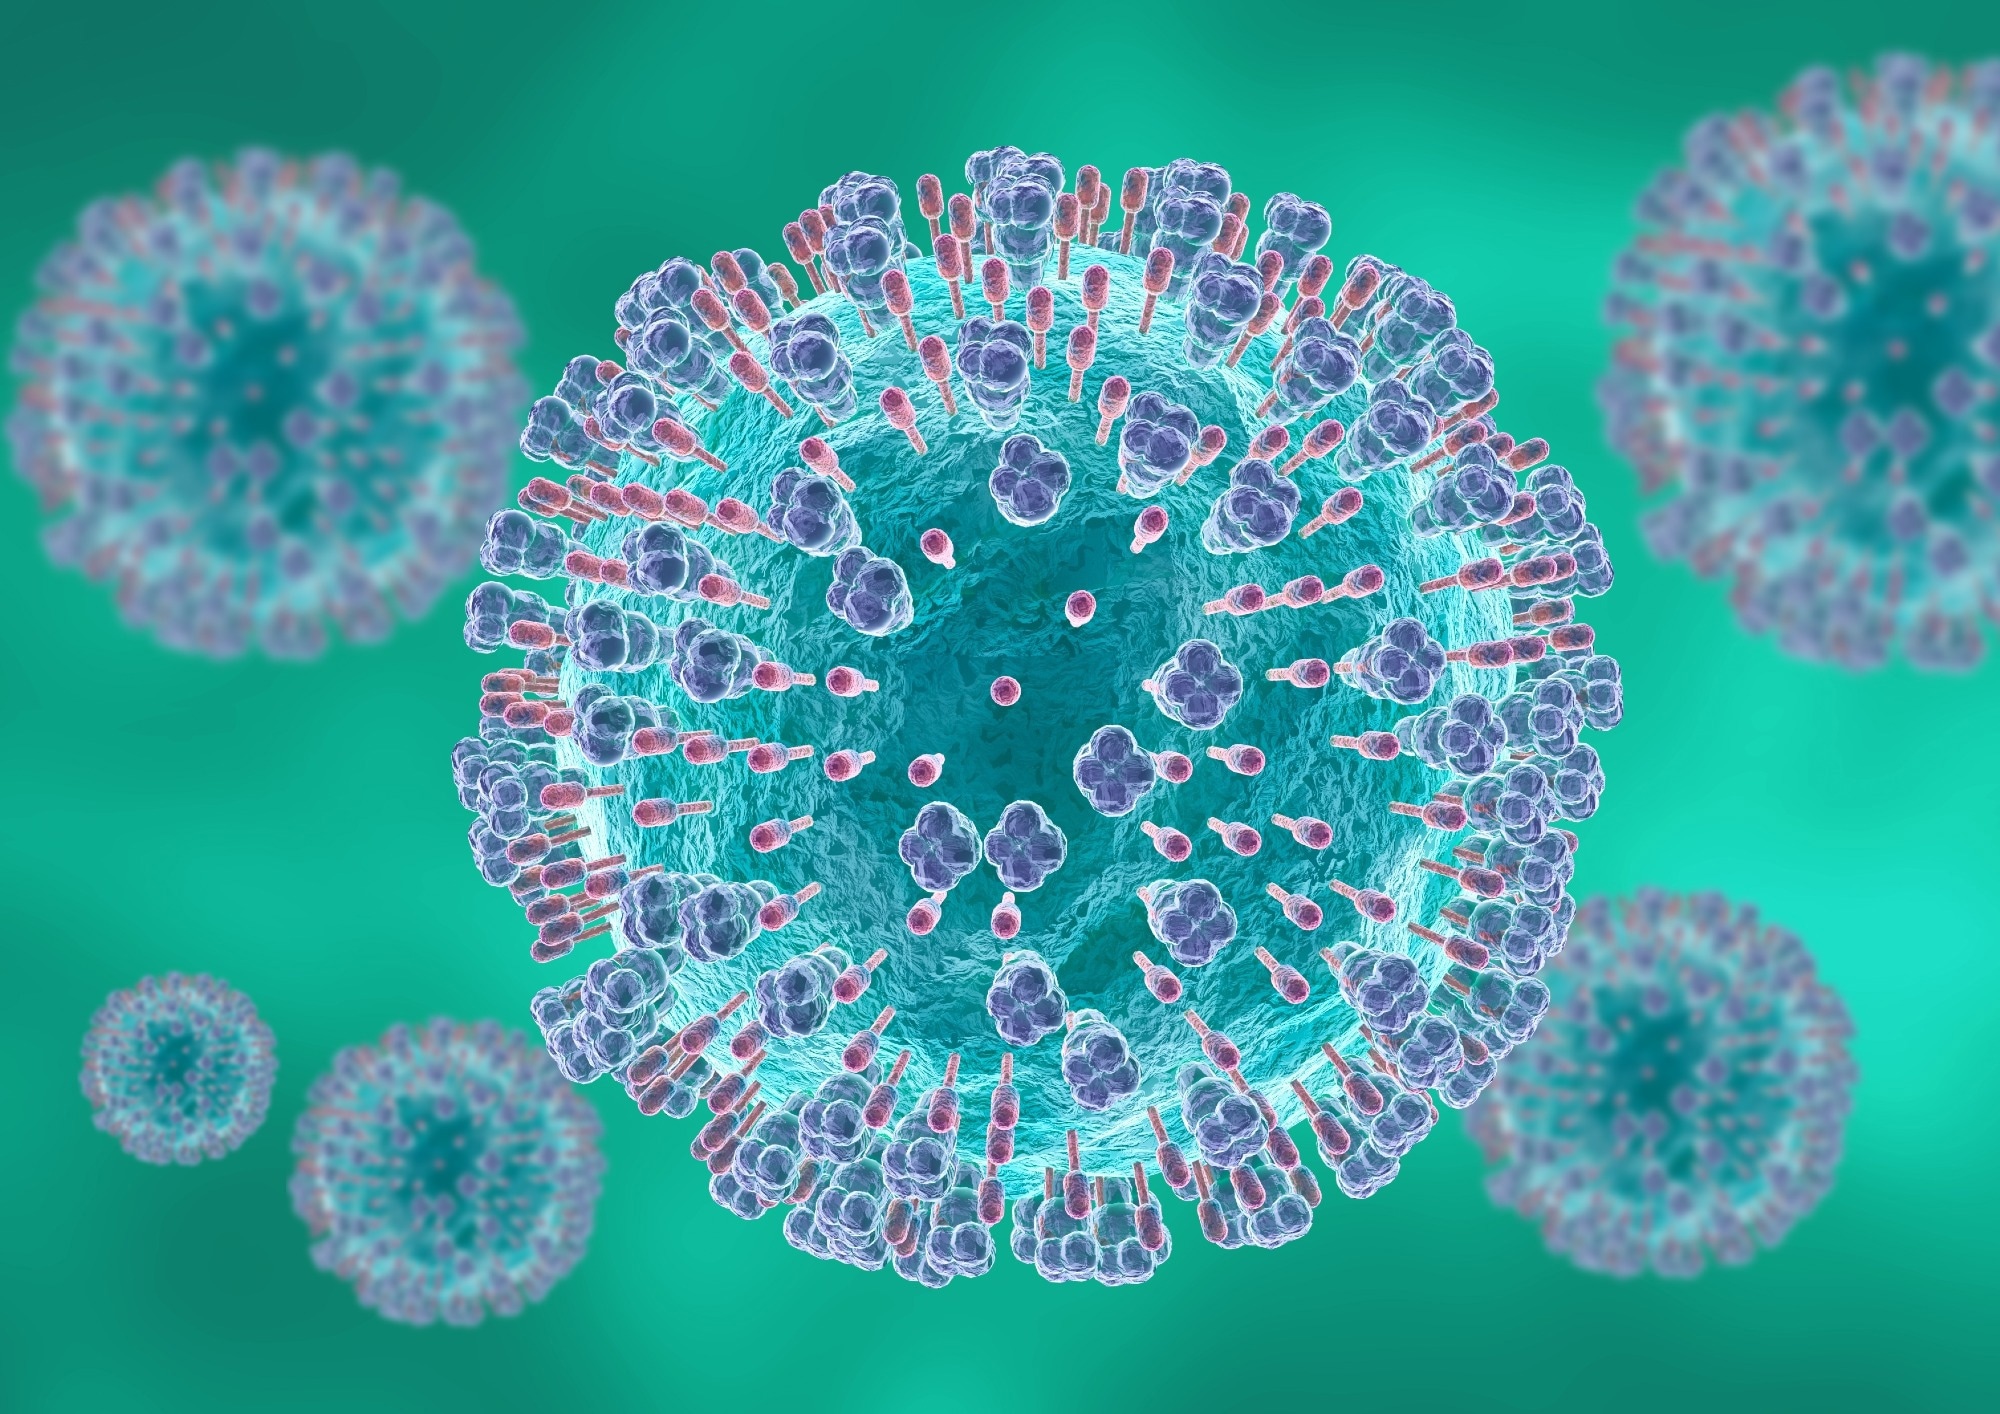 Study: A computational approach to design a polyvalent vaccine against human respiratory syncytial virus. Image Credit: Adao / Shutterstock.com